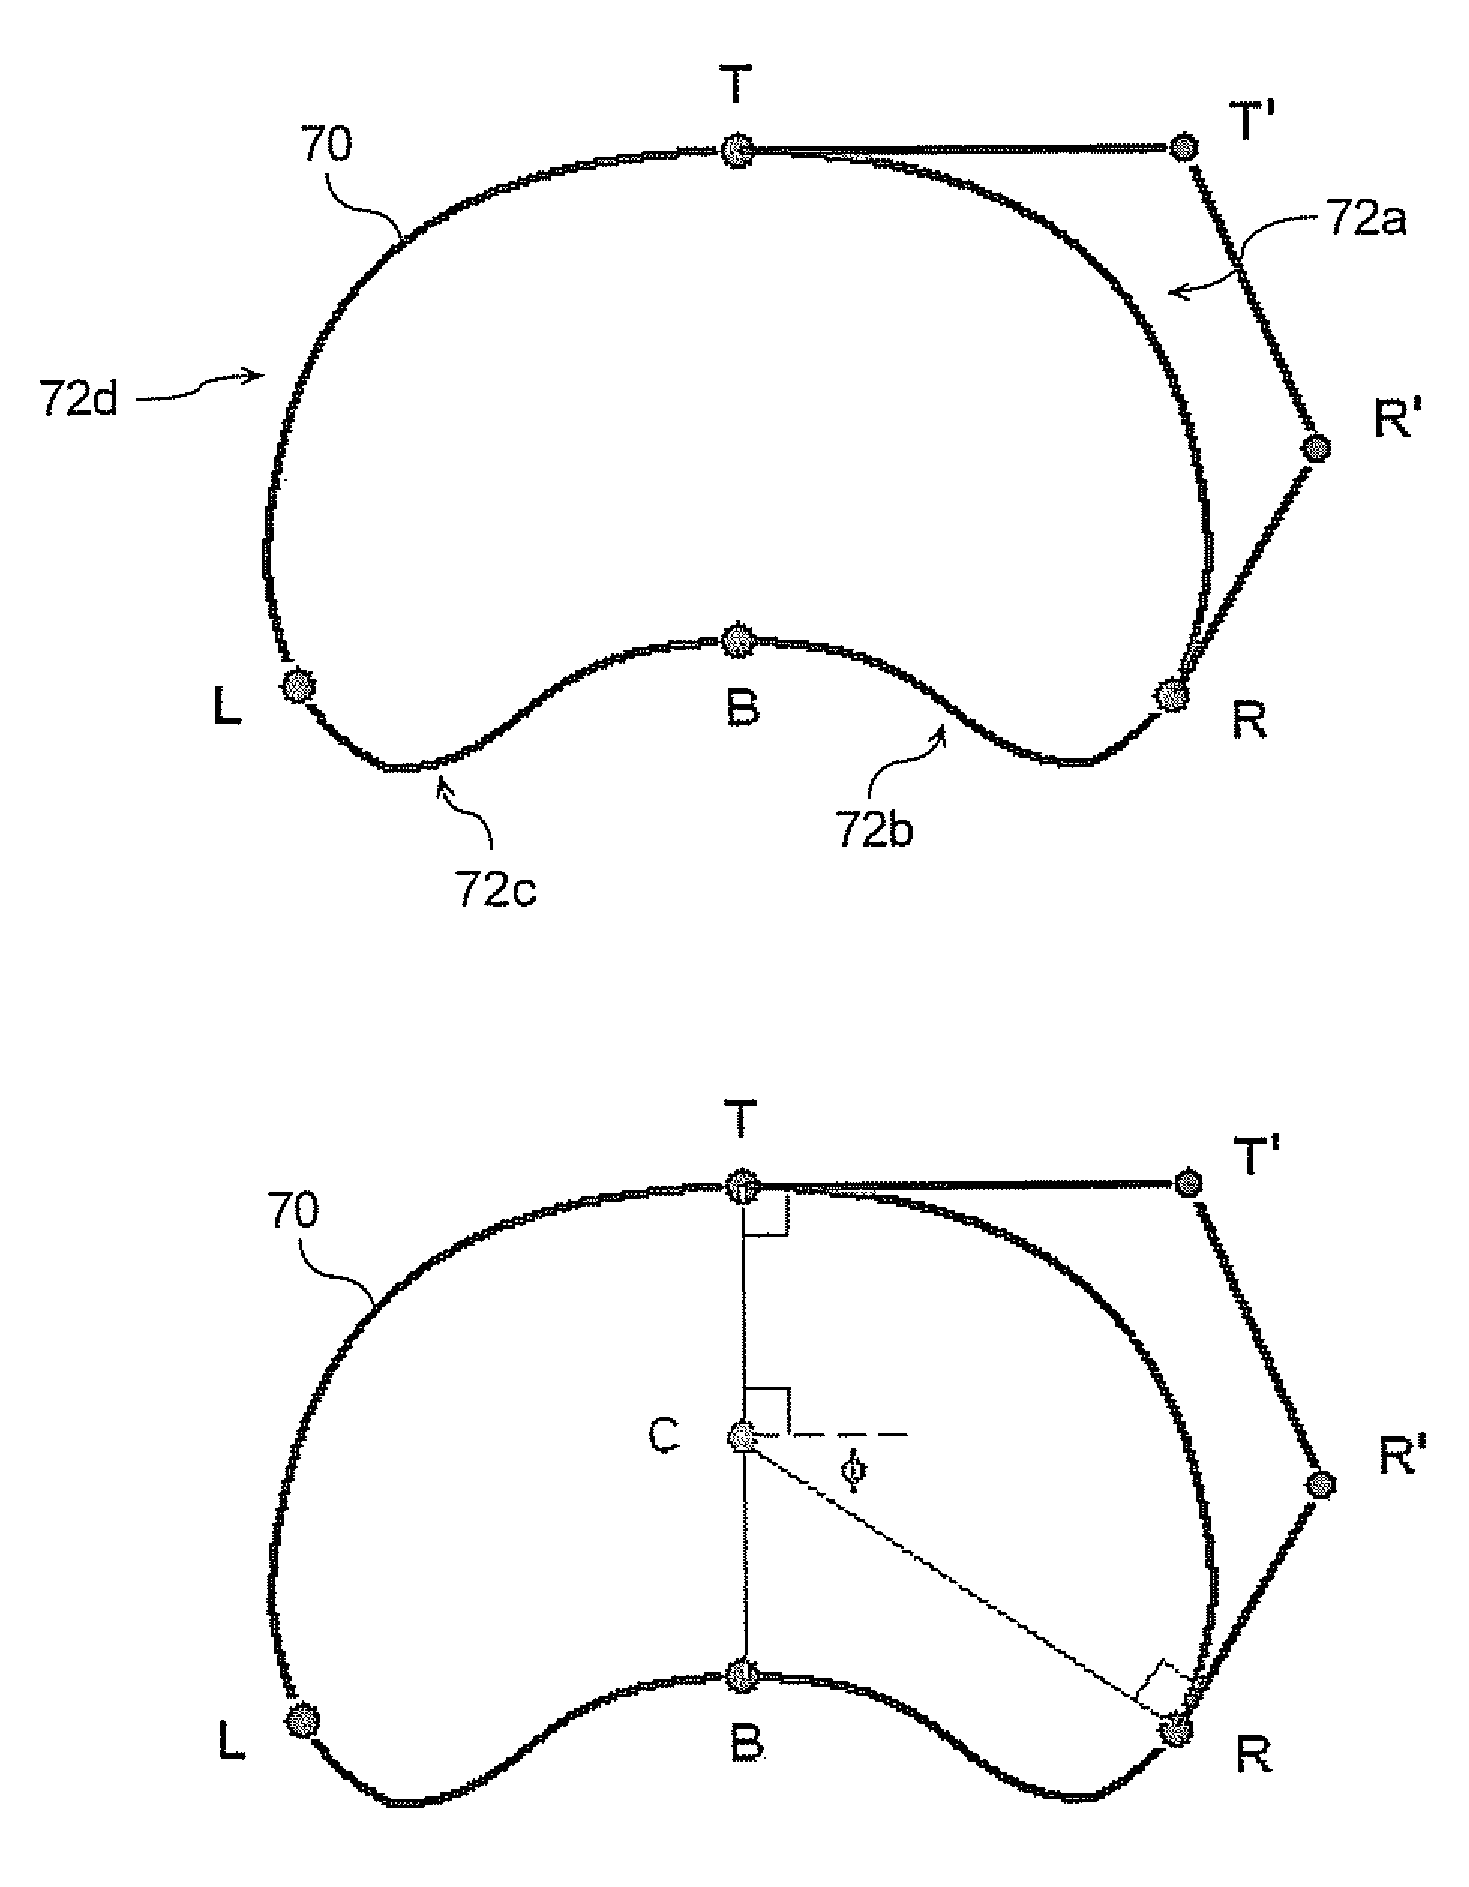 System and method for segmenting a region in a medical image